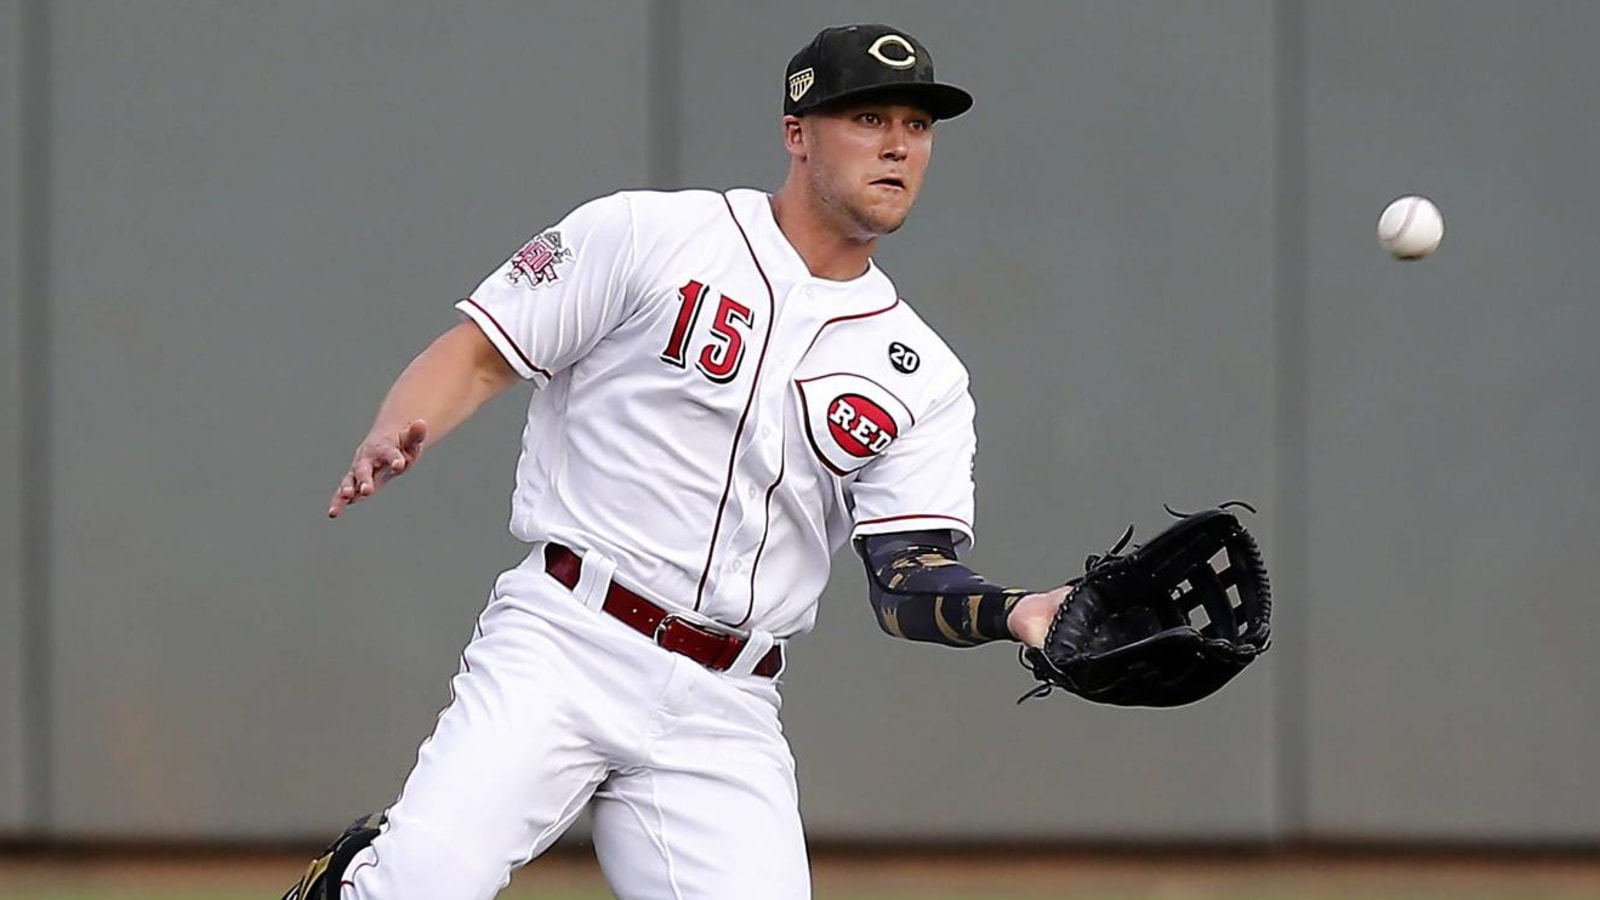 Reds not moving CF Nick Senzel back to SS